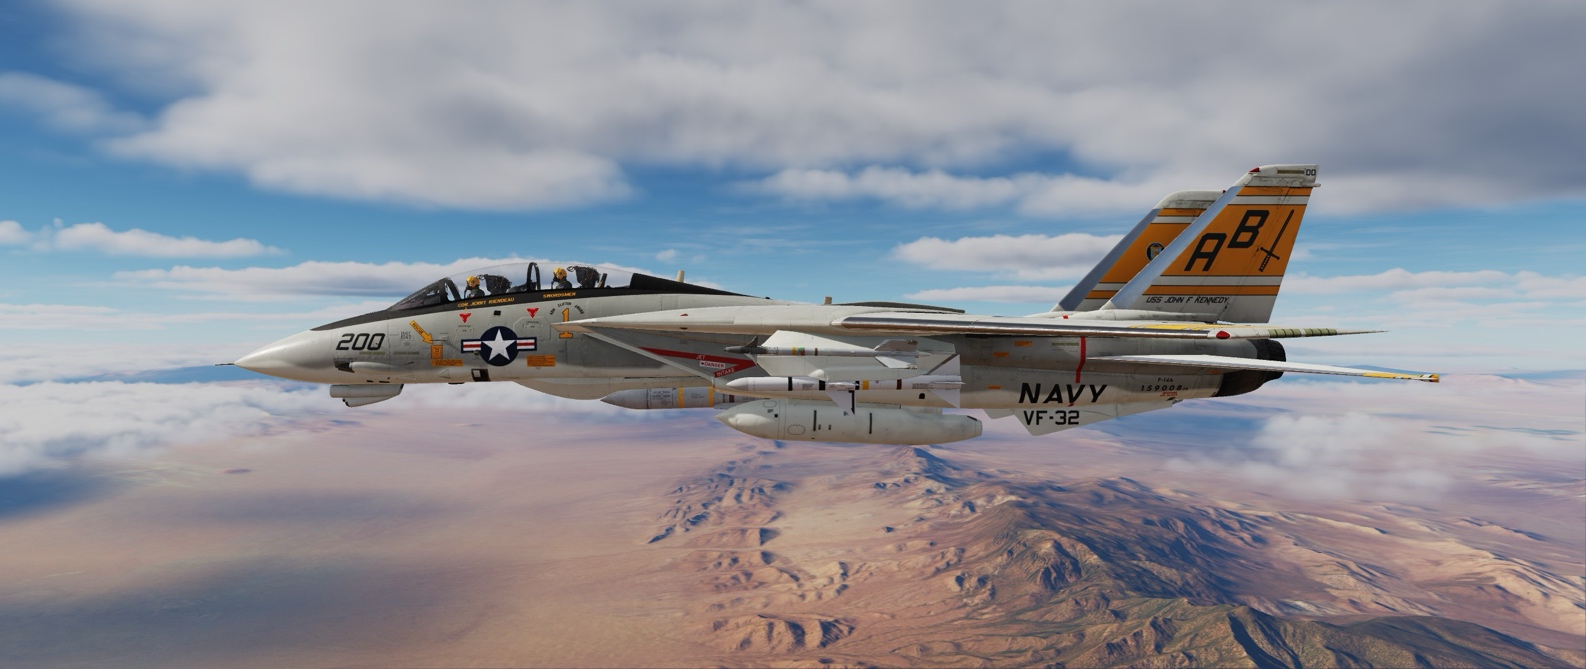 The DCS F-14 Tomcat, which is several years old, still impresses with its quality. - Experts in Realism, Household Name Synonymous With Quality - Conversation With Heatblur Team - dokument - 2024-03-11